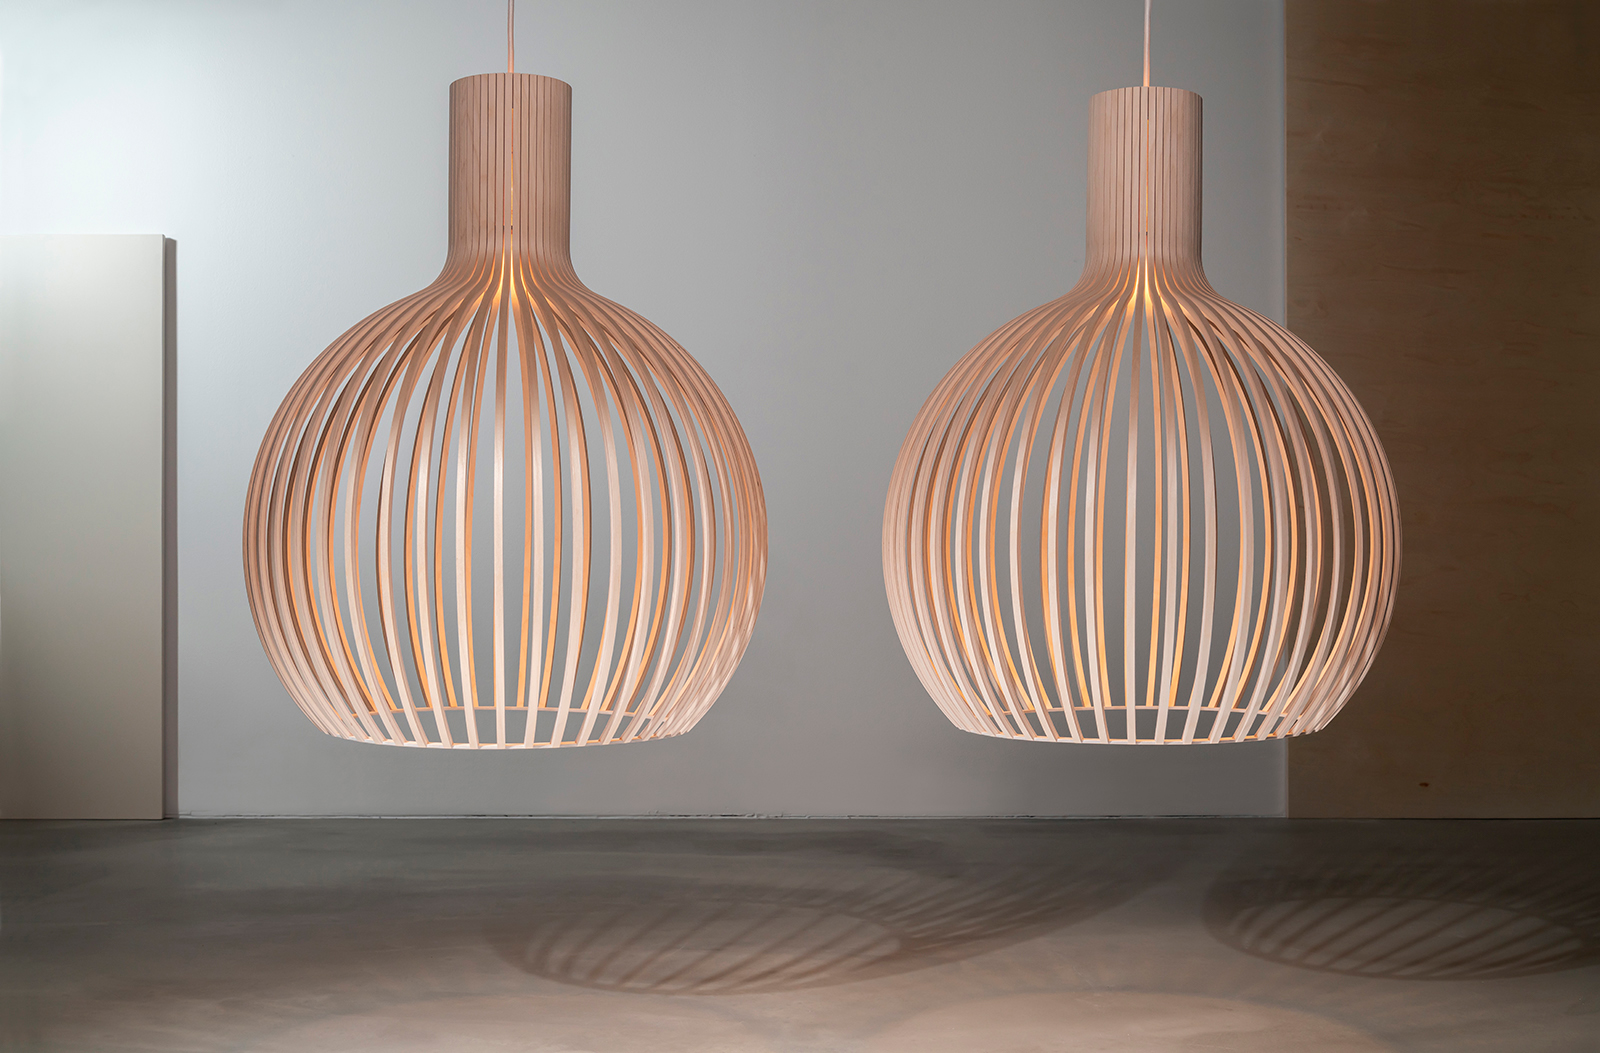 Two Octo pendant lamps in birch hanging side by side in front of a grey background.